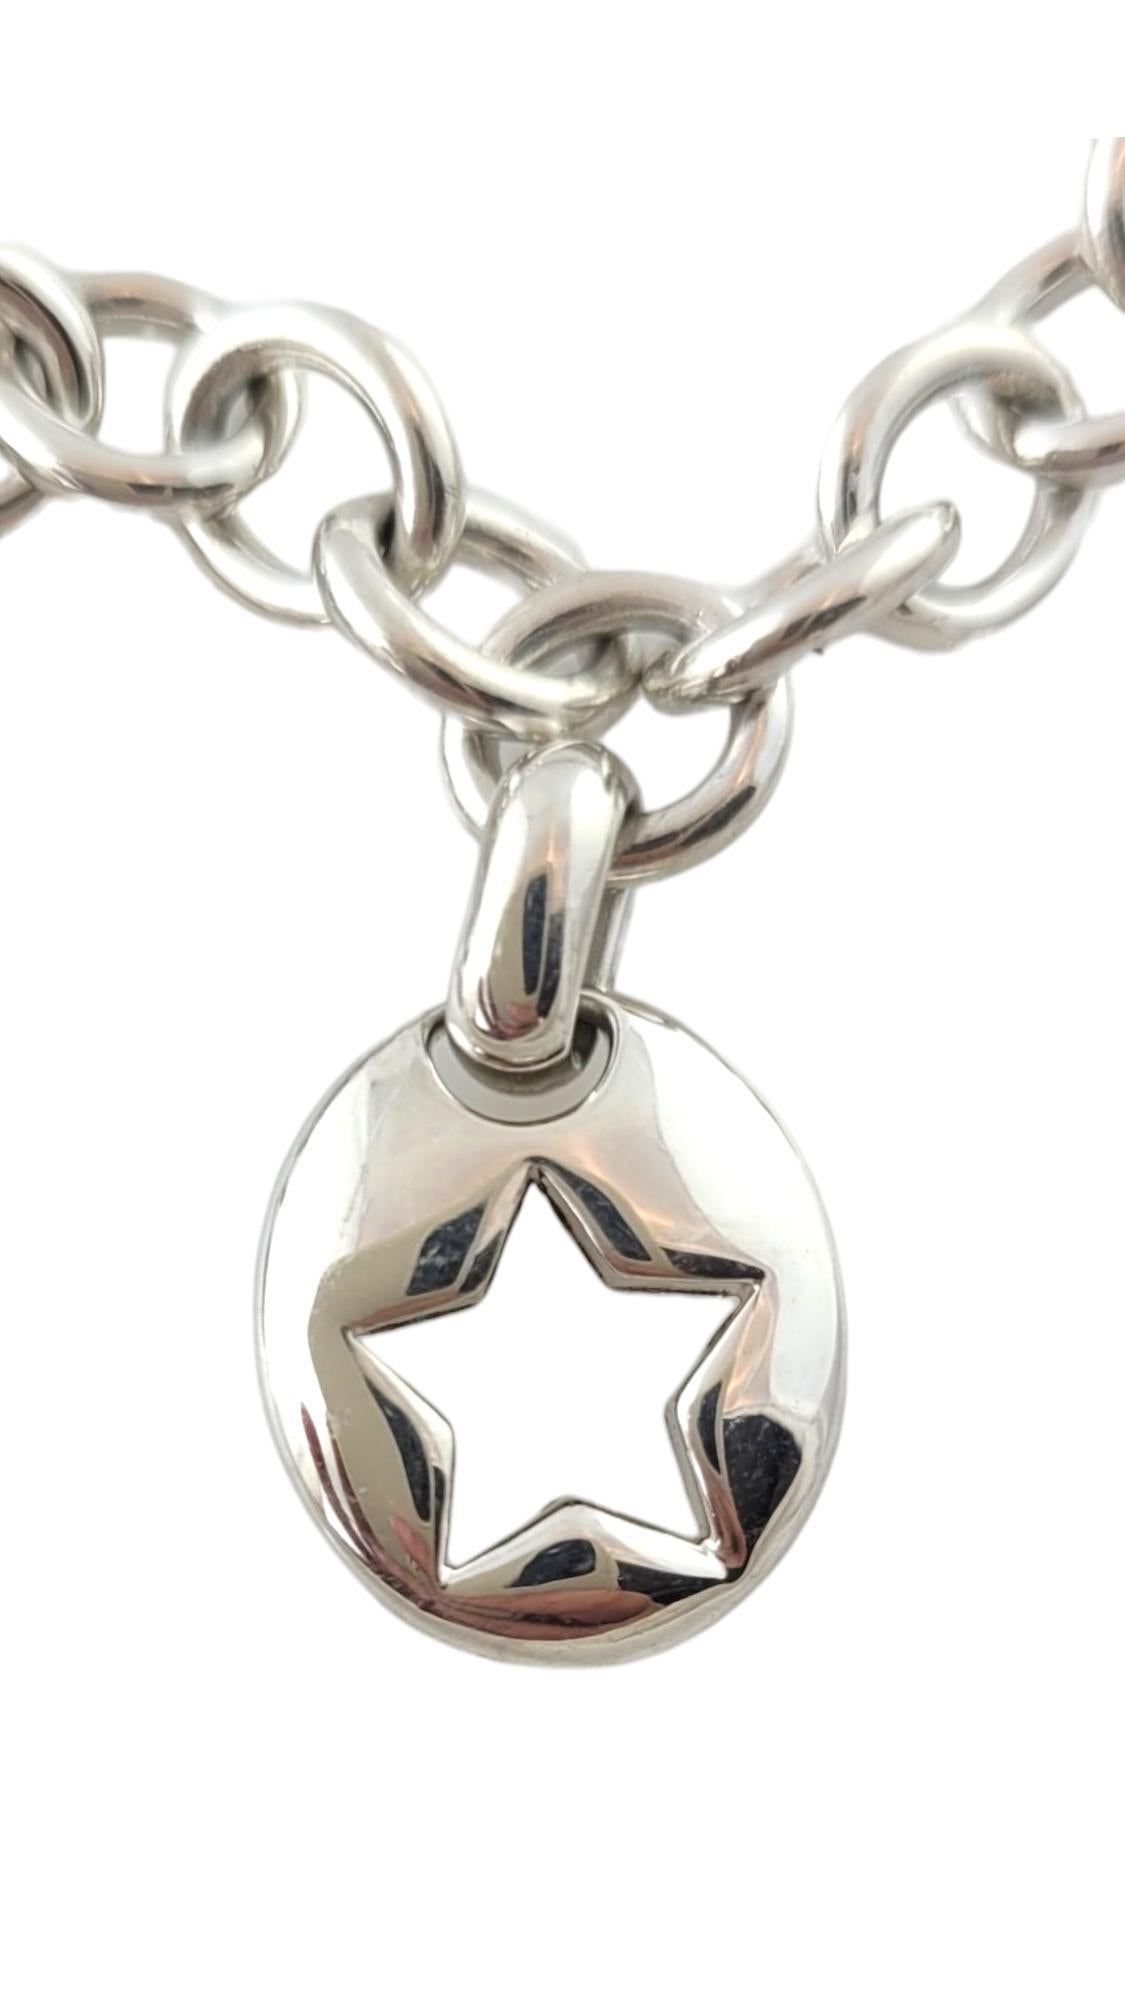 Women's Tiffany & Co. Sterling Silver Stars and Moon Charm Bracelet #17395 For Sale